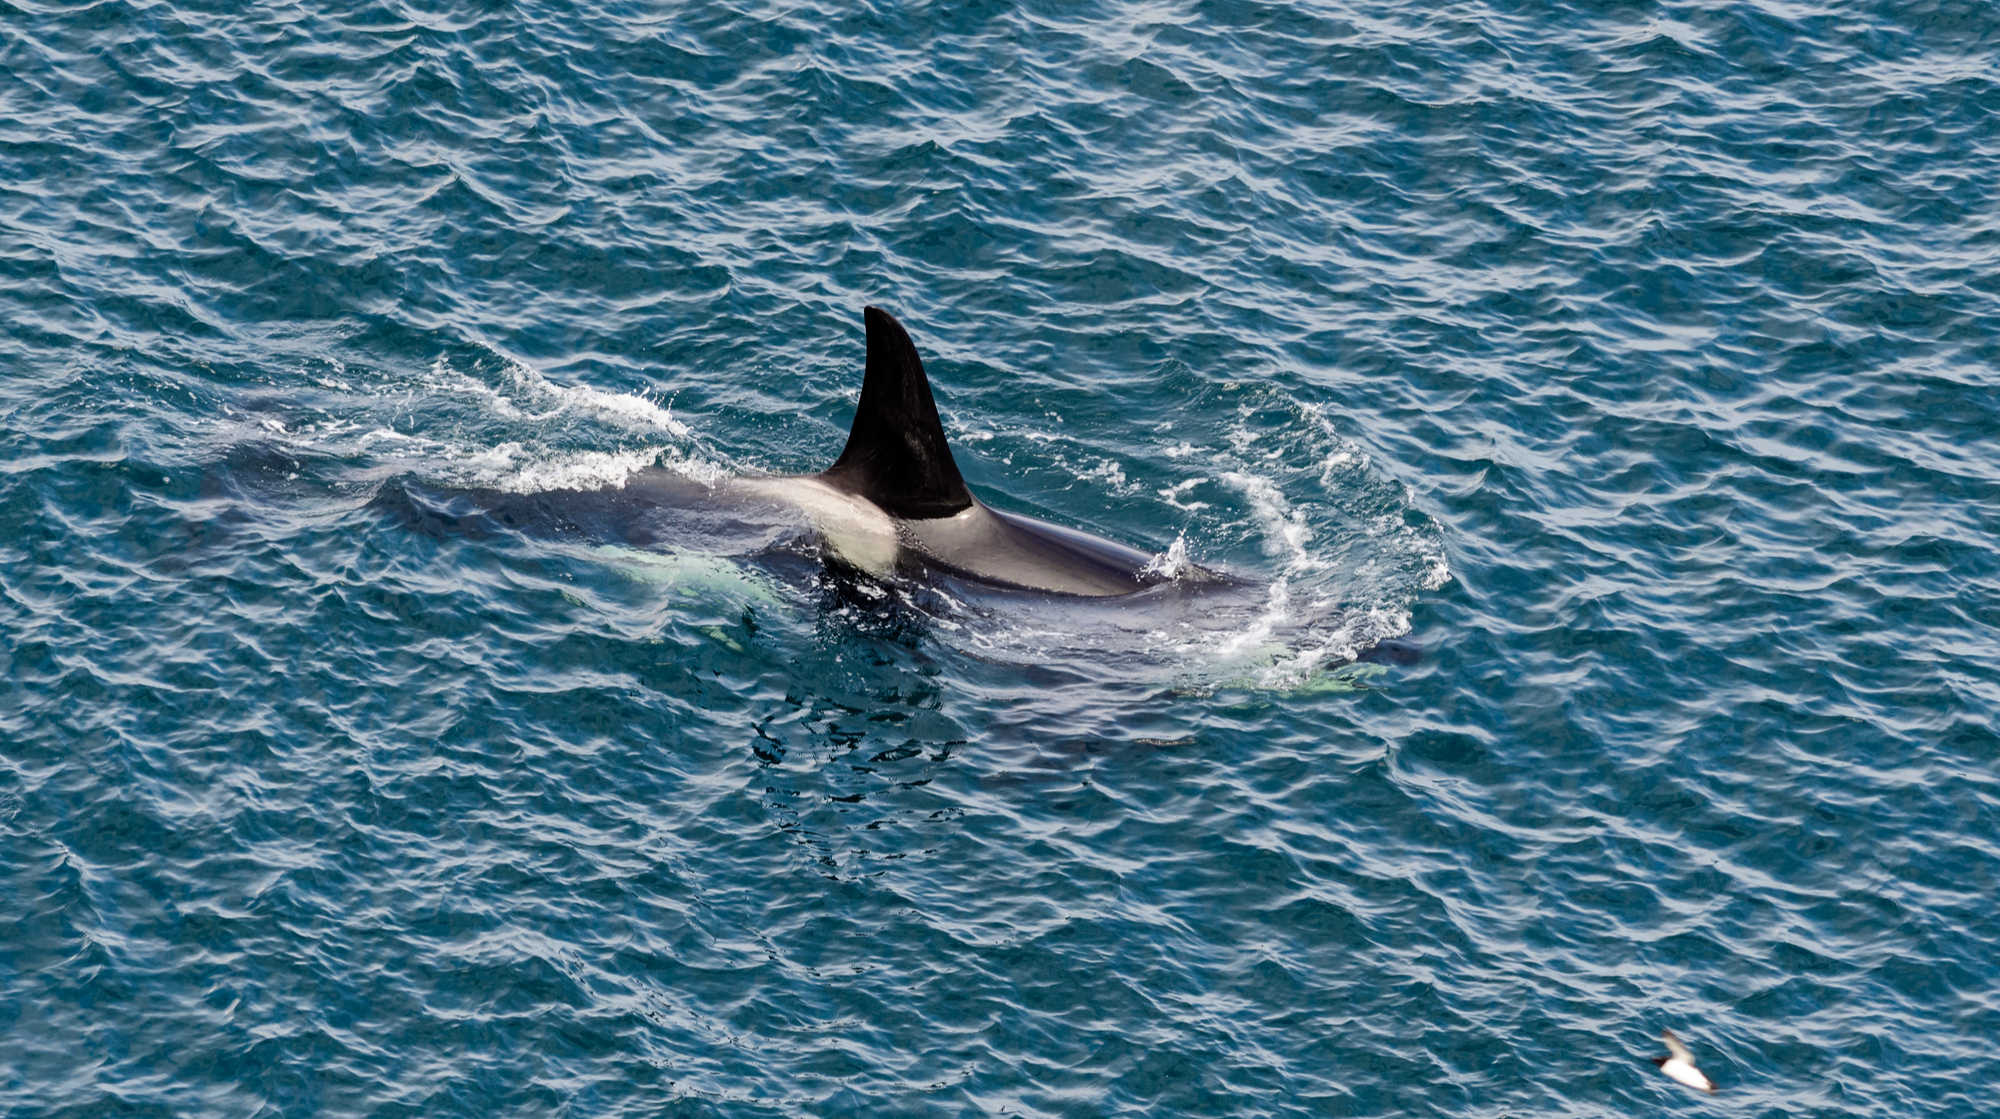 Why a lone killer whale killed a great white shark in two minutes: research